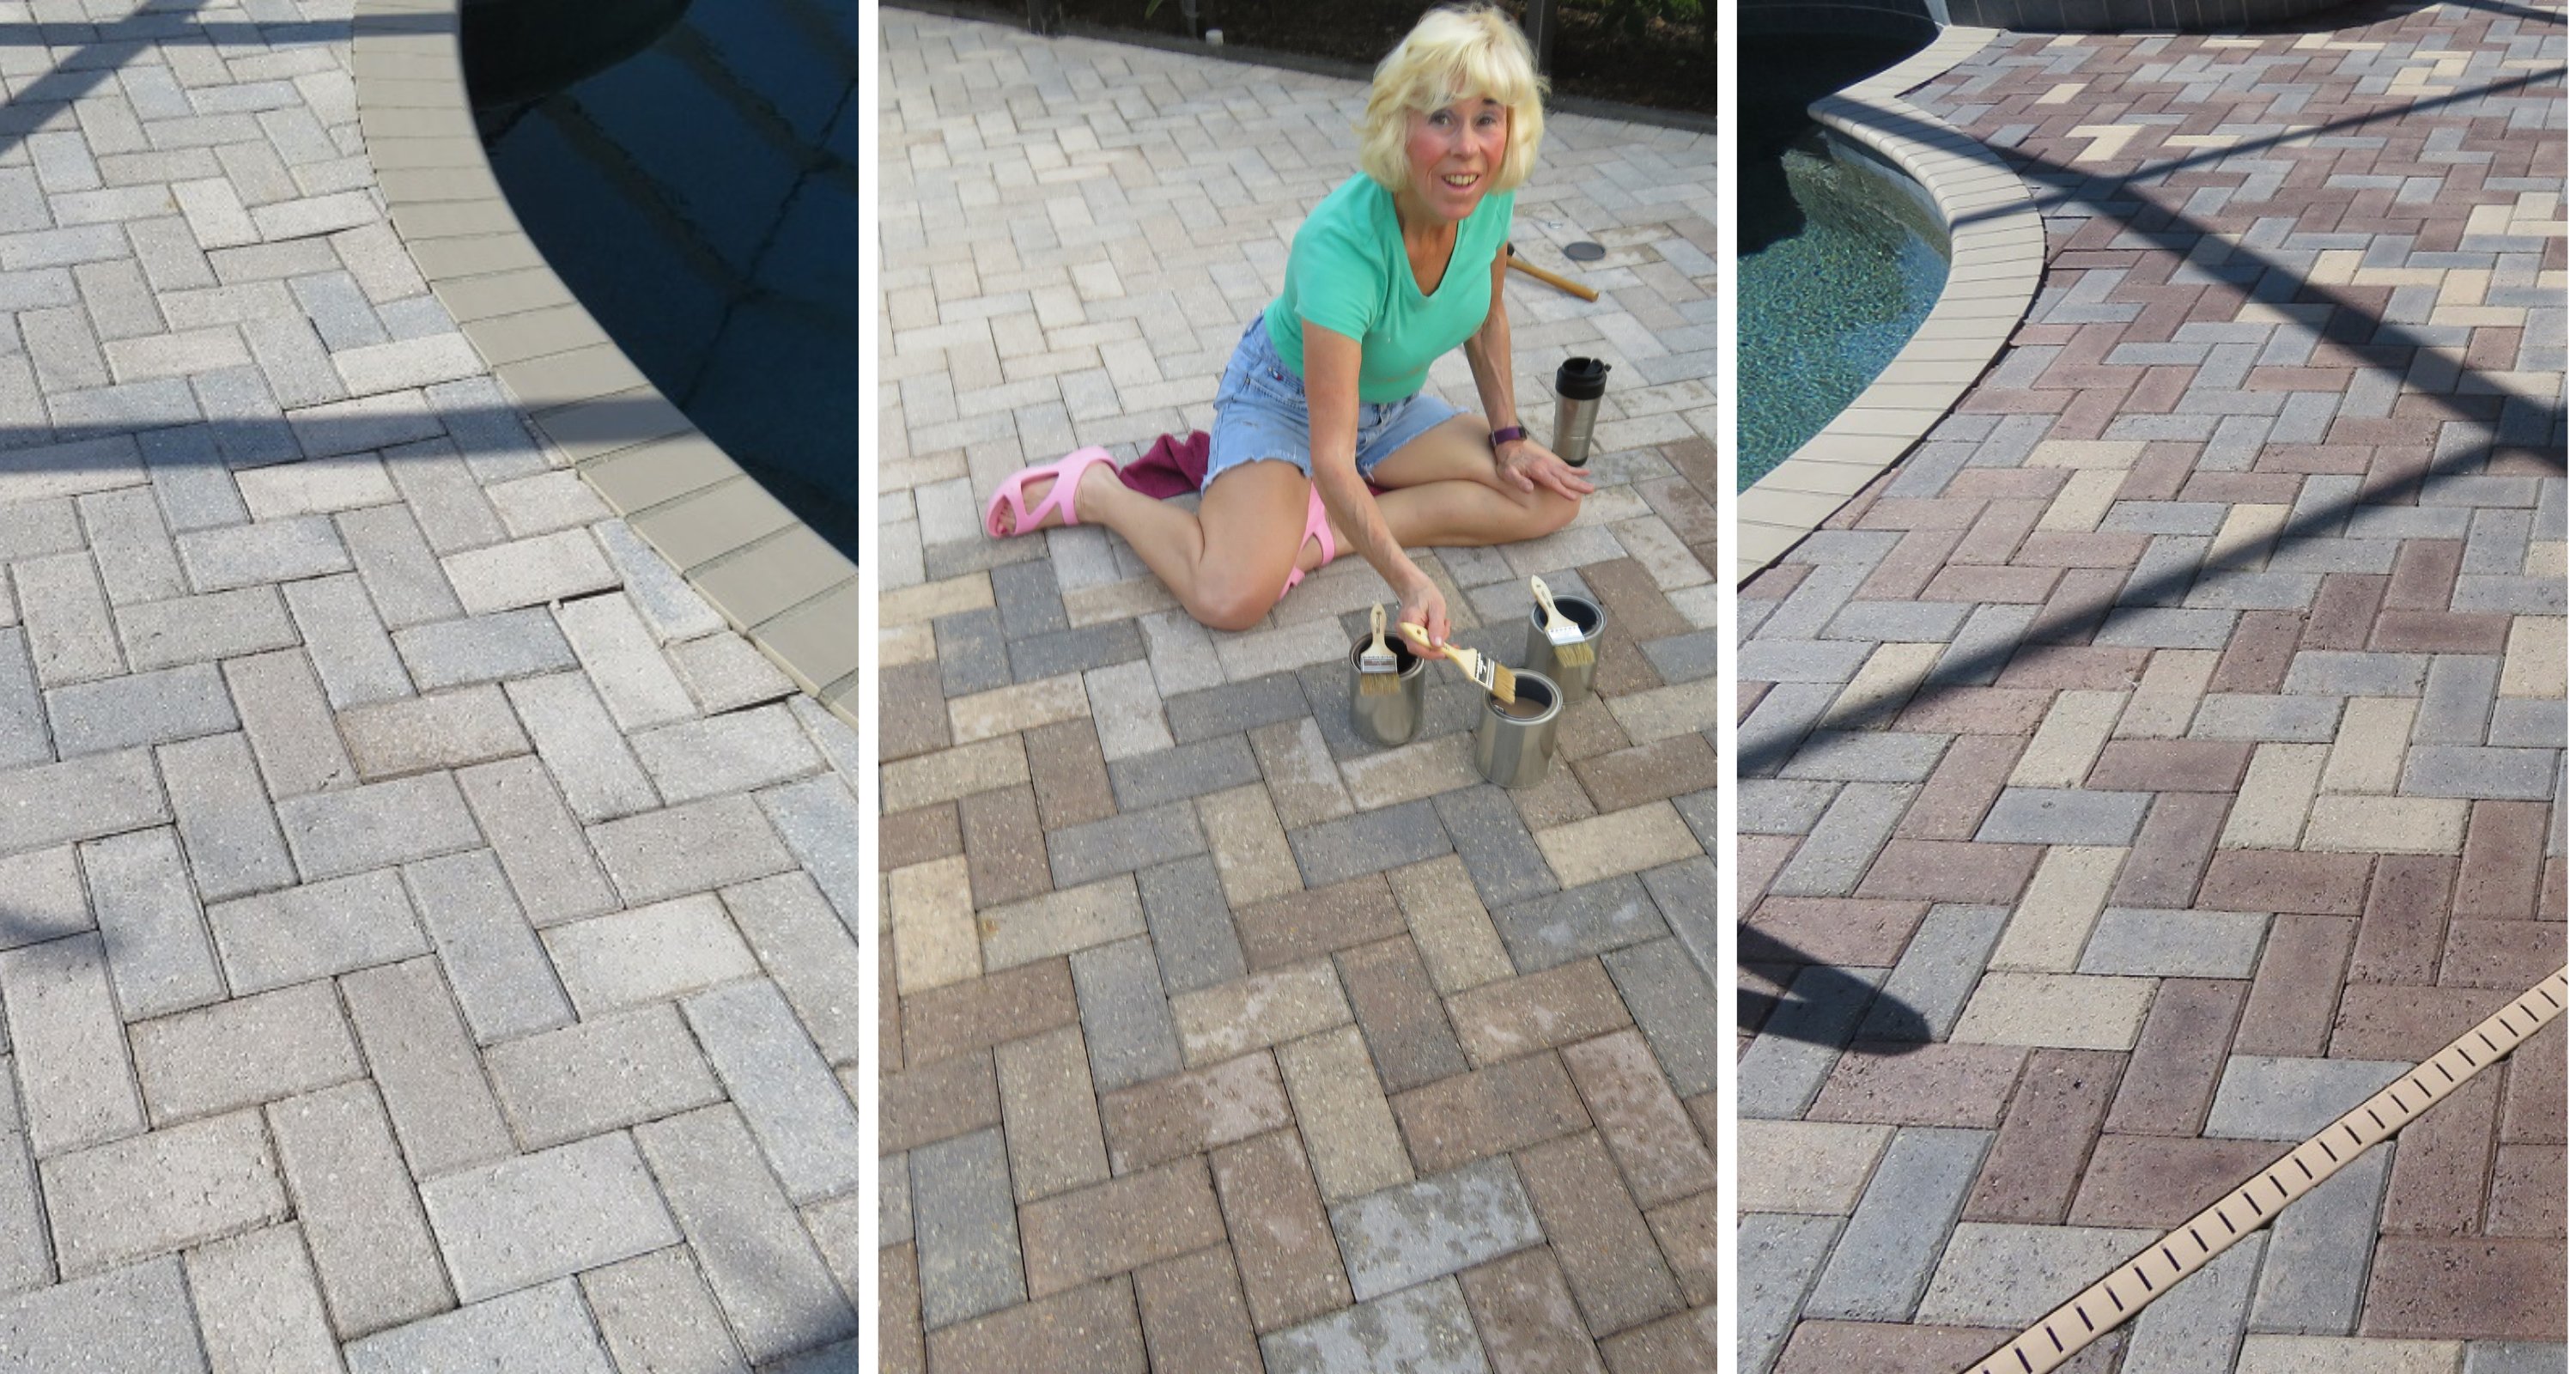 A three-image sequence showing the restoration process of faded pool deck pavers. The first image displays the pool area with faded pavers looking washed out. In the second image, a smiling woman is preparing to apply EasyTint acrylic tinted sealer to the pavers, with four cans of stain and a paintbrush at her side. The final image reveals the refreshed pavers in varied shades of gray, brown and tan, updating the poolside's aesthetic.